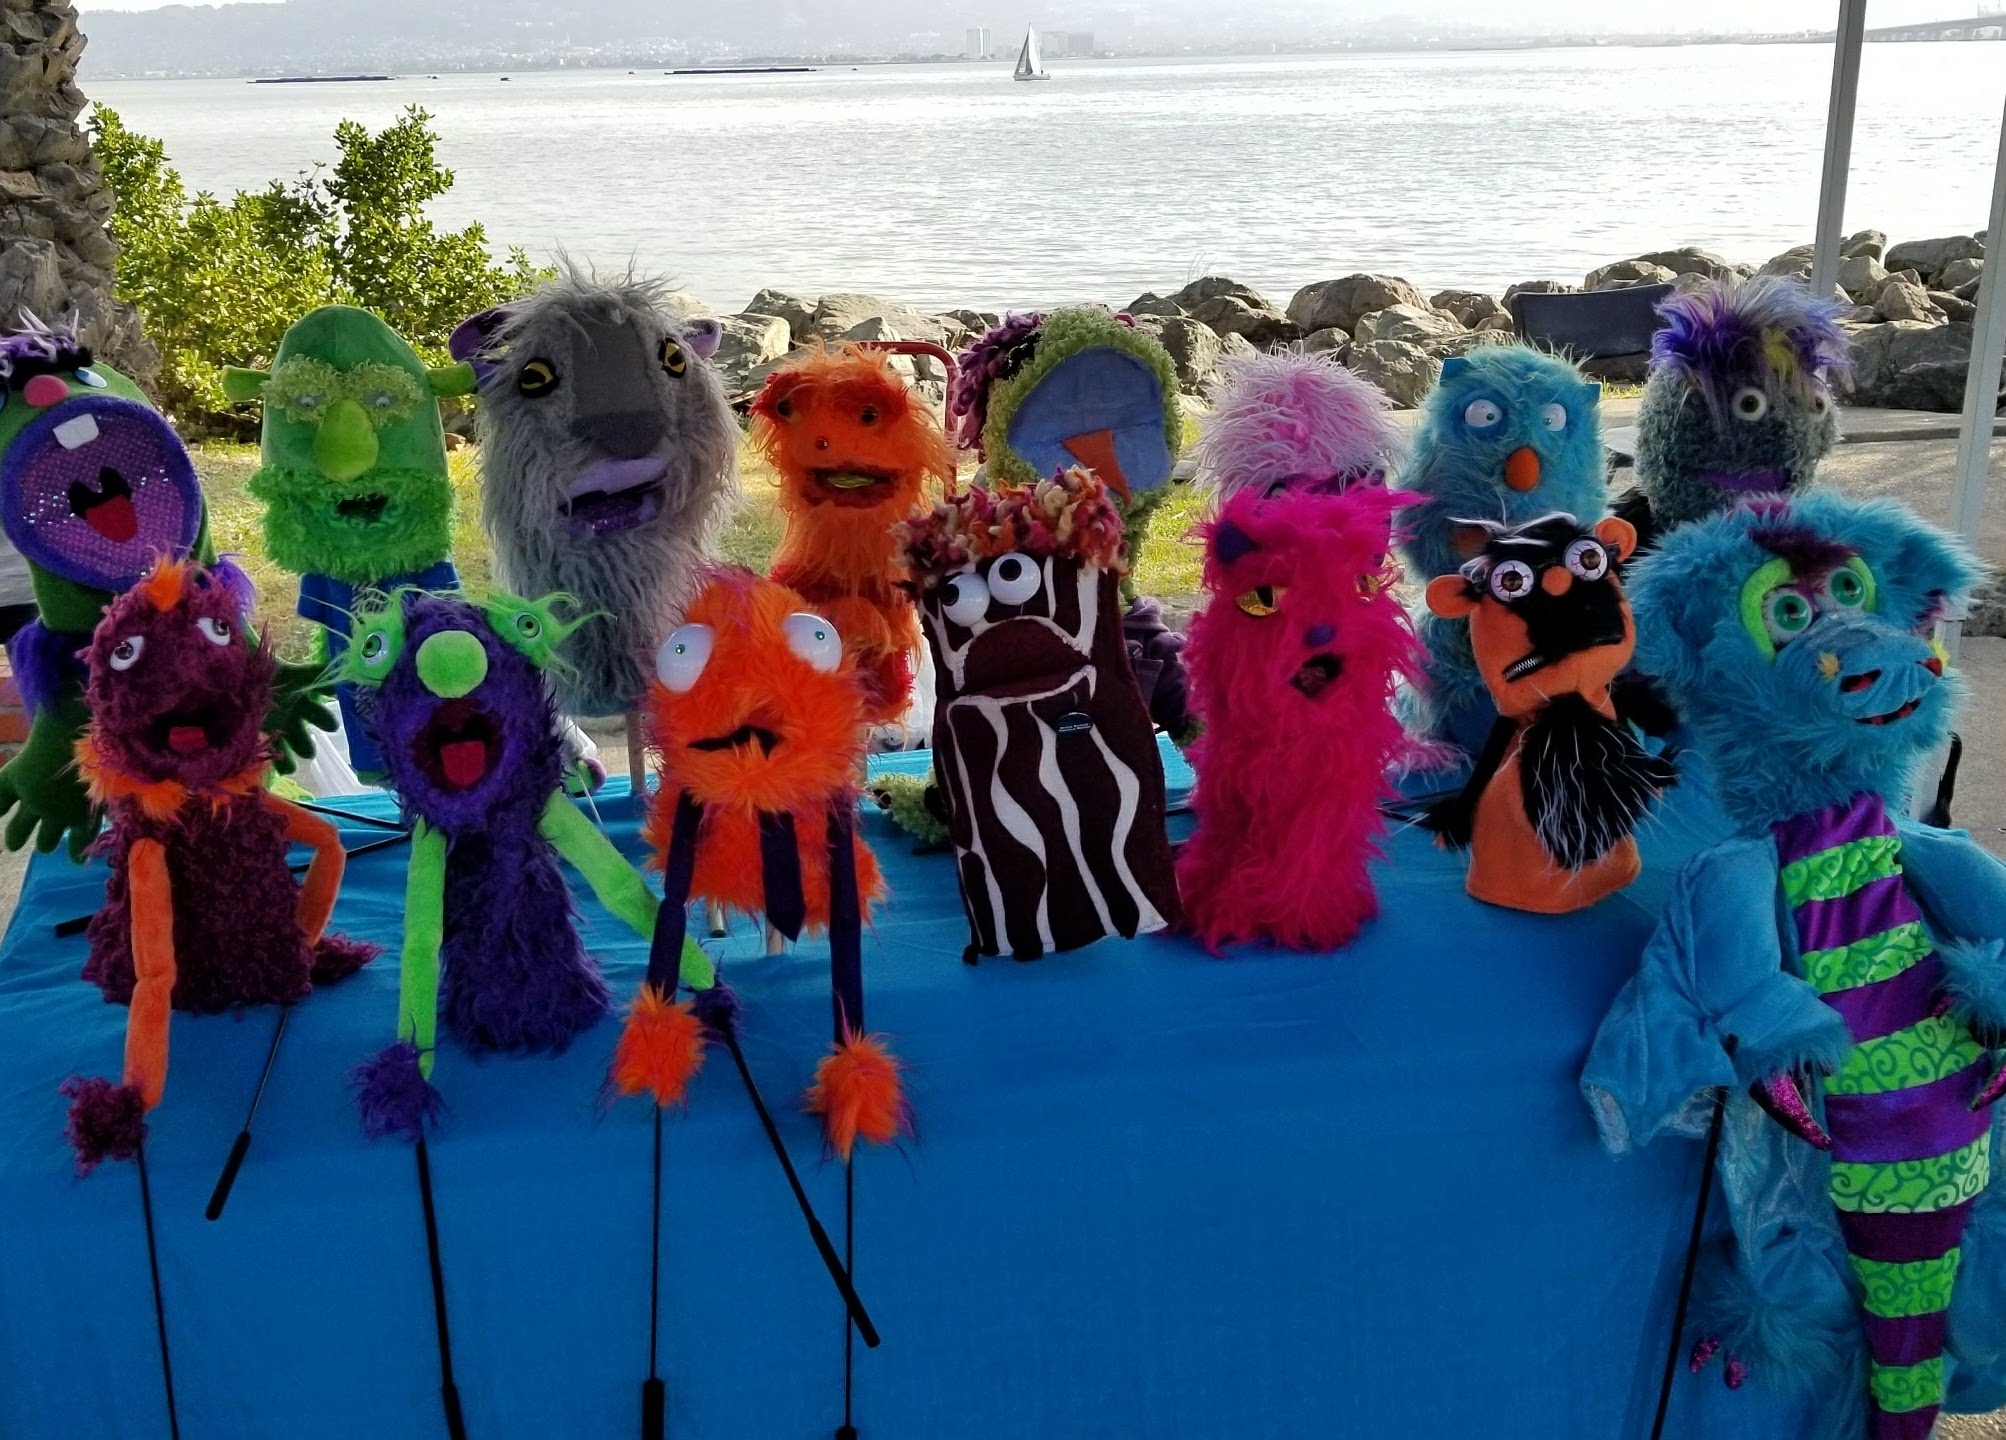 Seeking new homes for puppets